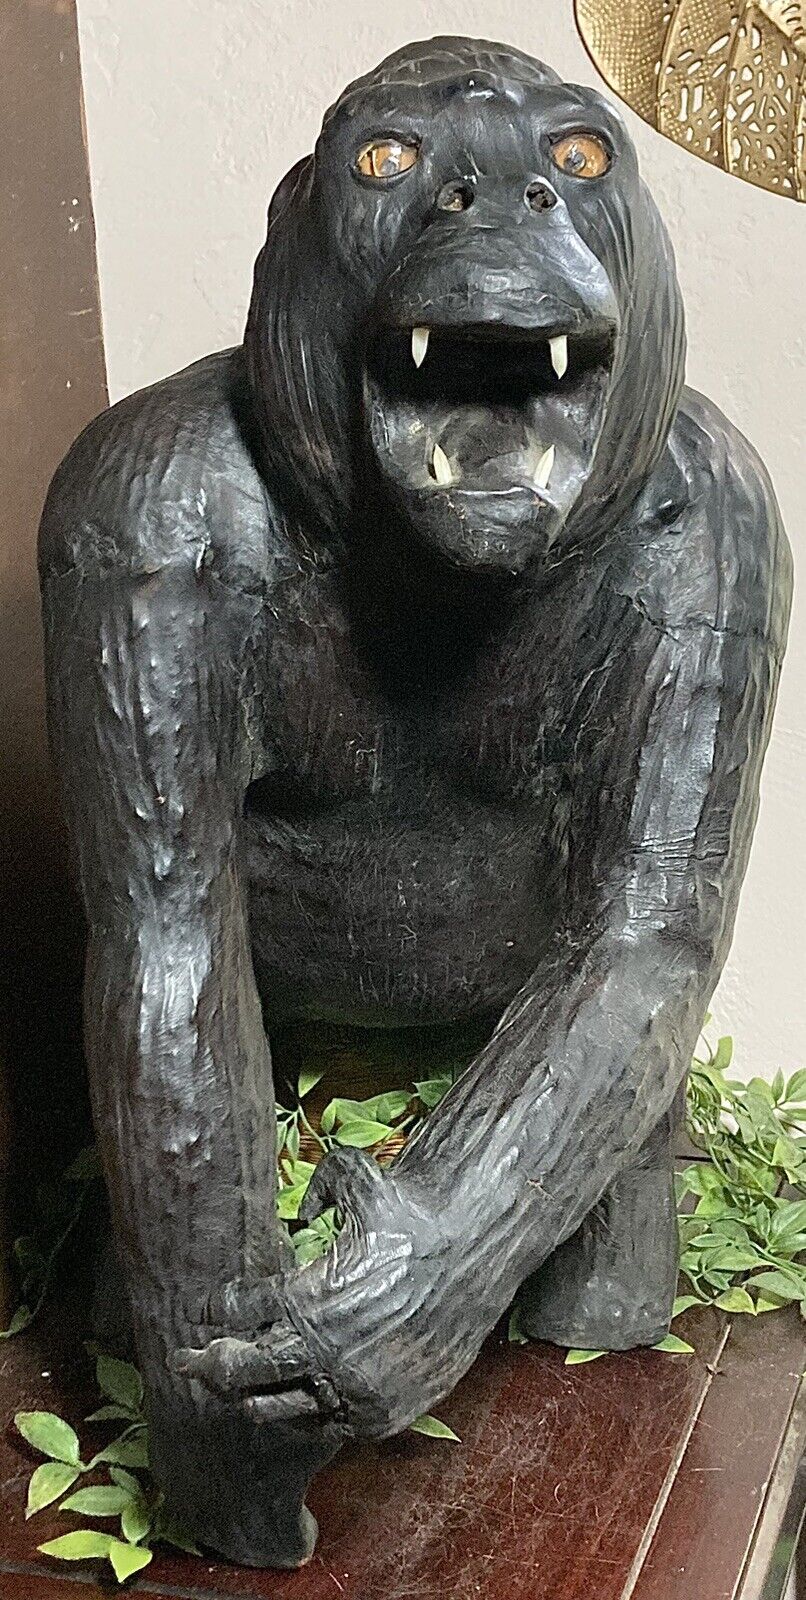 Large Vintage Leather Wrapped Gorilla/King Kong Gold Glass Eyes 22” X 17” X 10”